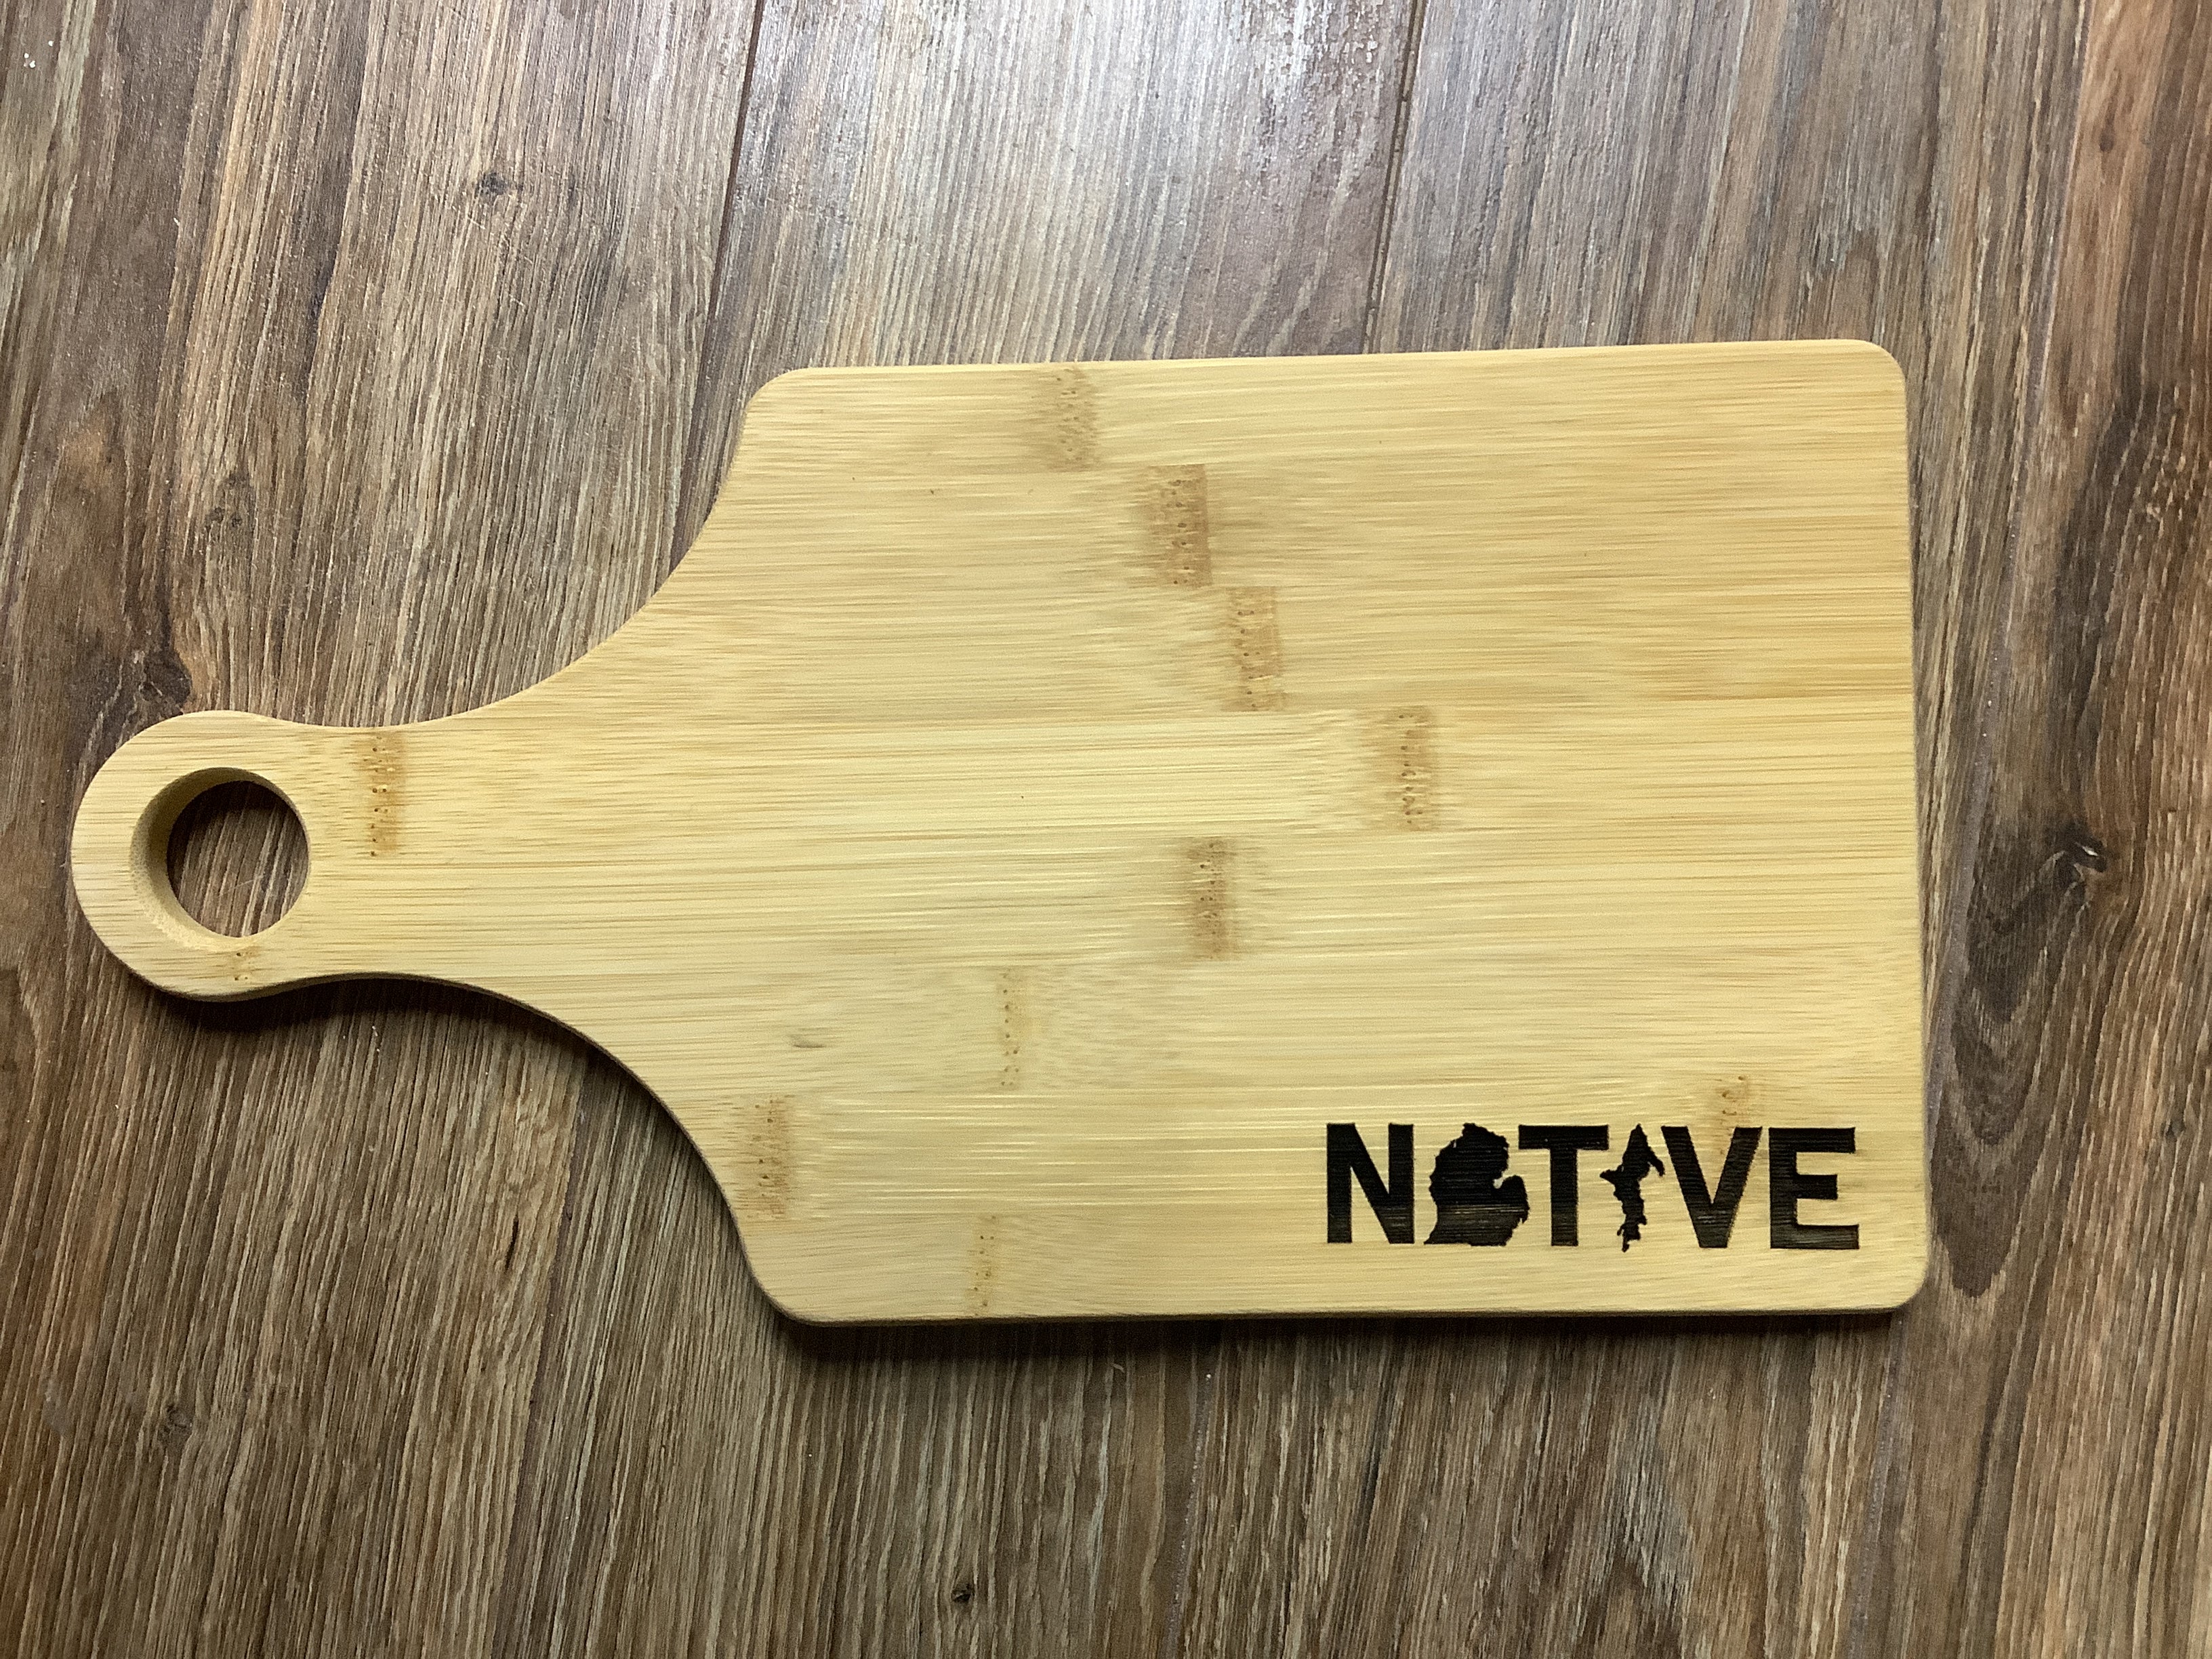 Native - Word - Wooden Engraved - Cutting Board